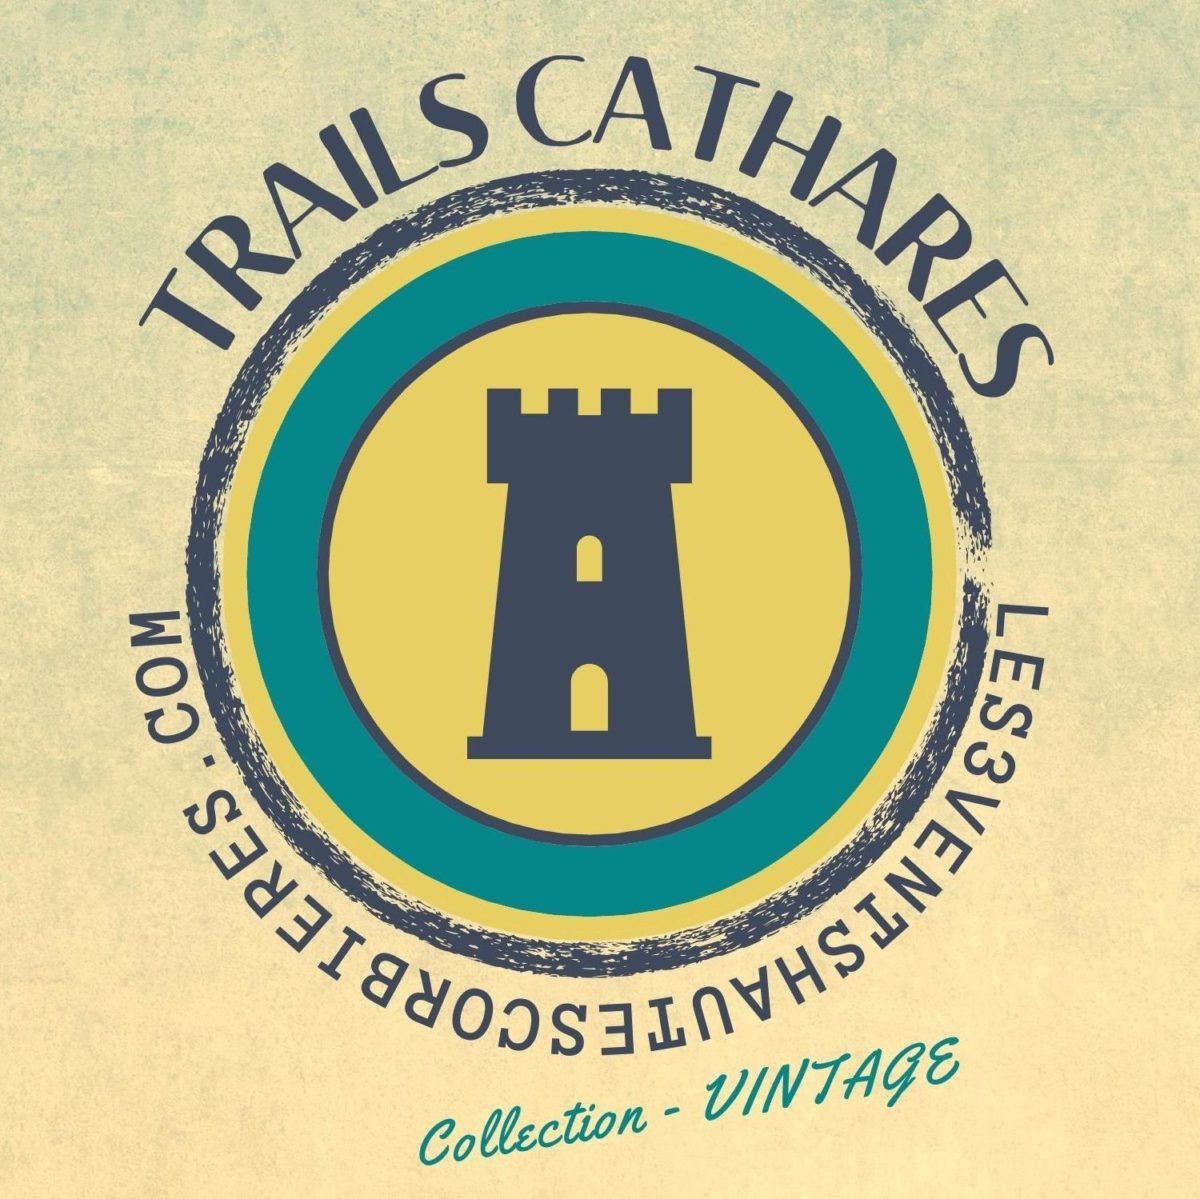 Trails Cathares – 2022